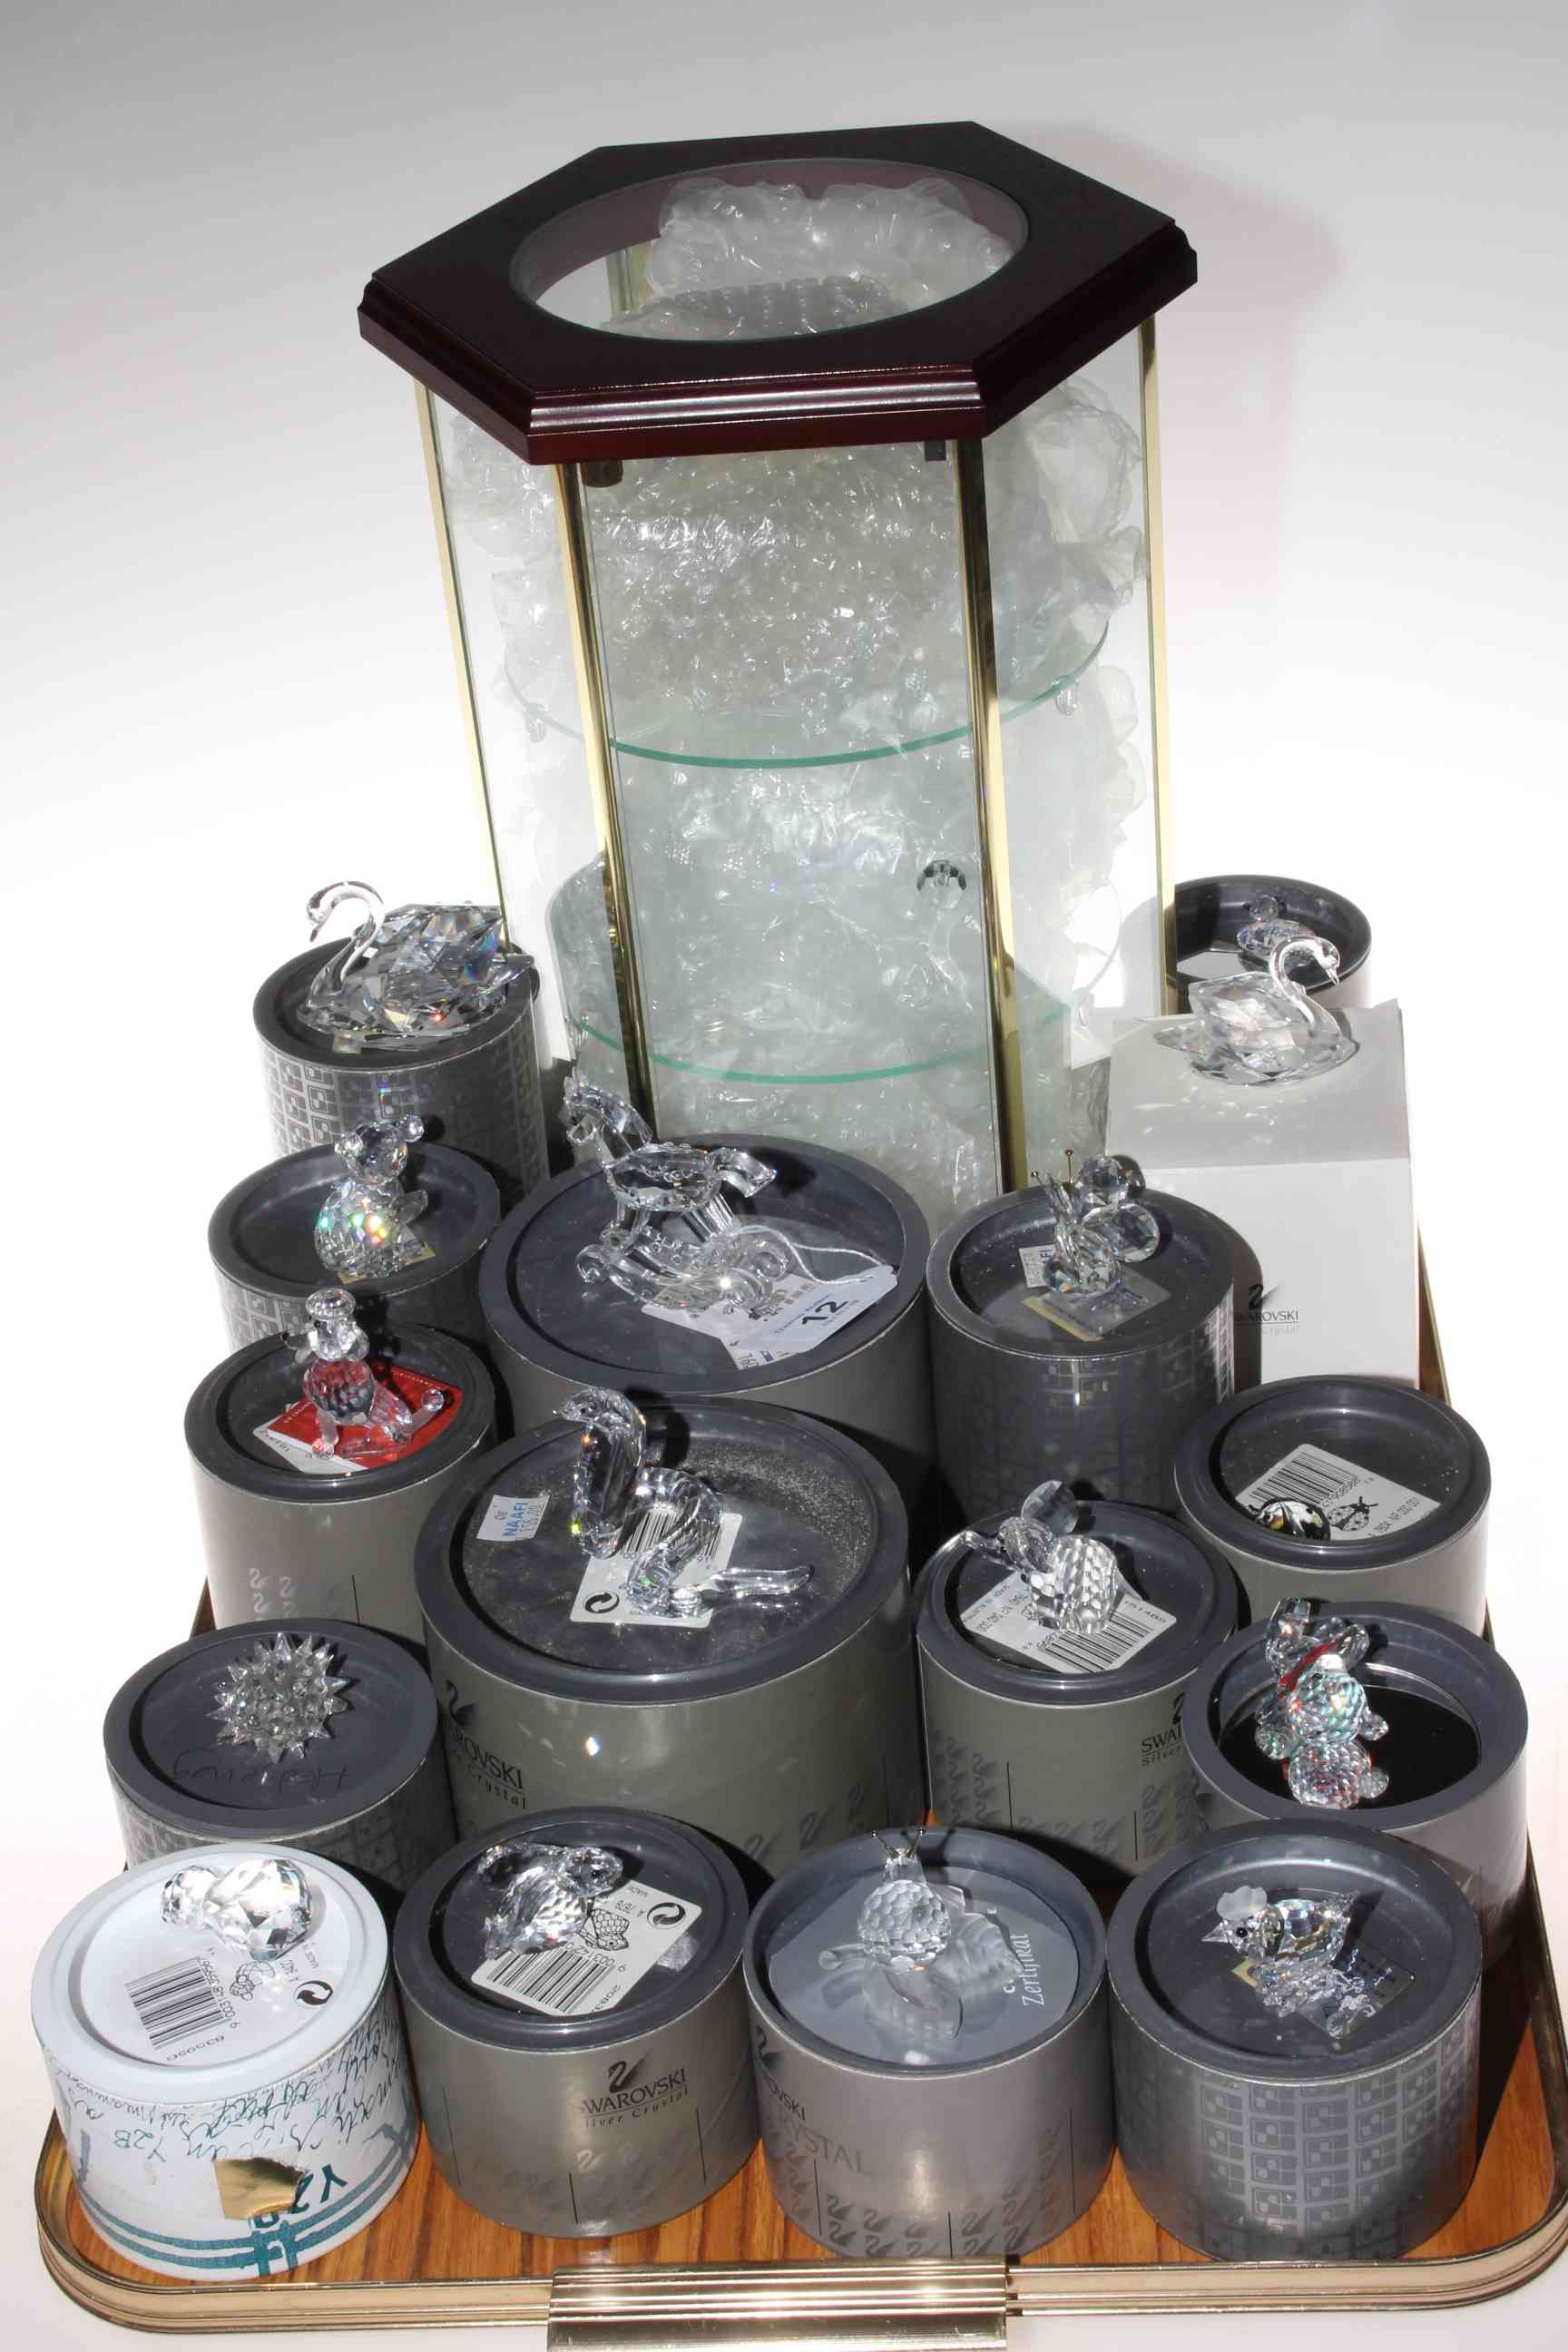 Collection of Swarovski glass ornaments and small octagonal display case.